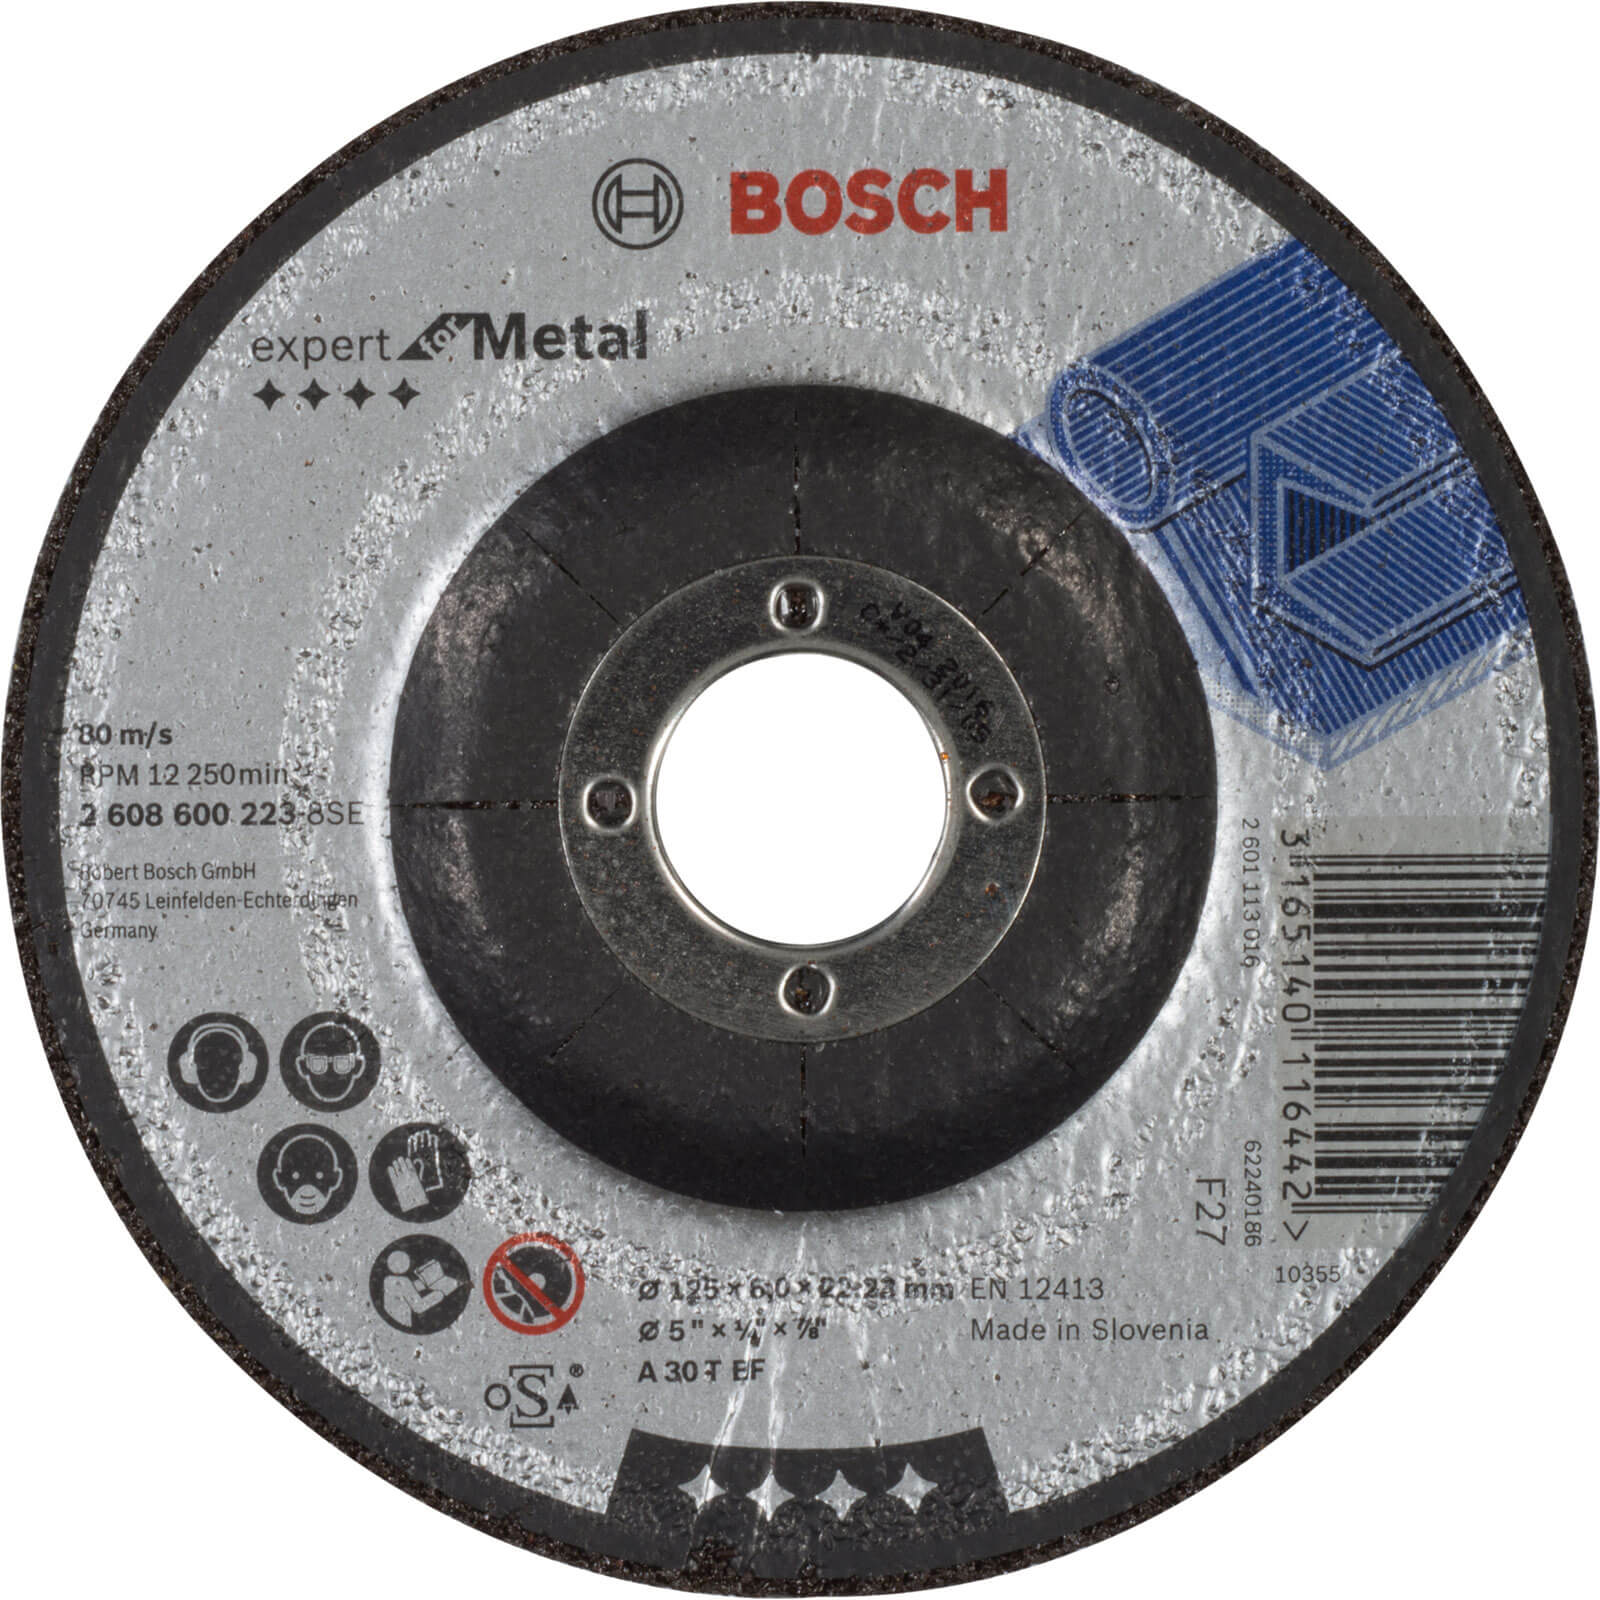 Photo of Bosch A30t Bf Drepressed Centre Metal Grinding Disc 125mm